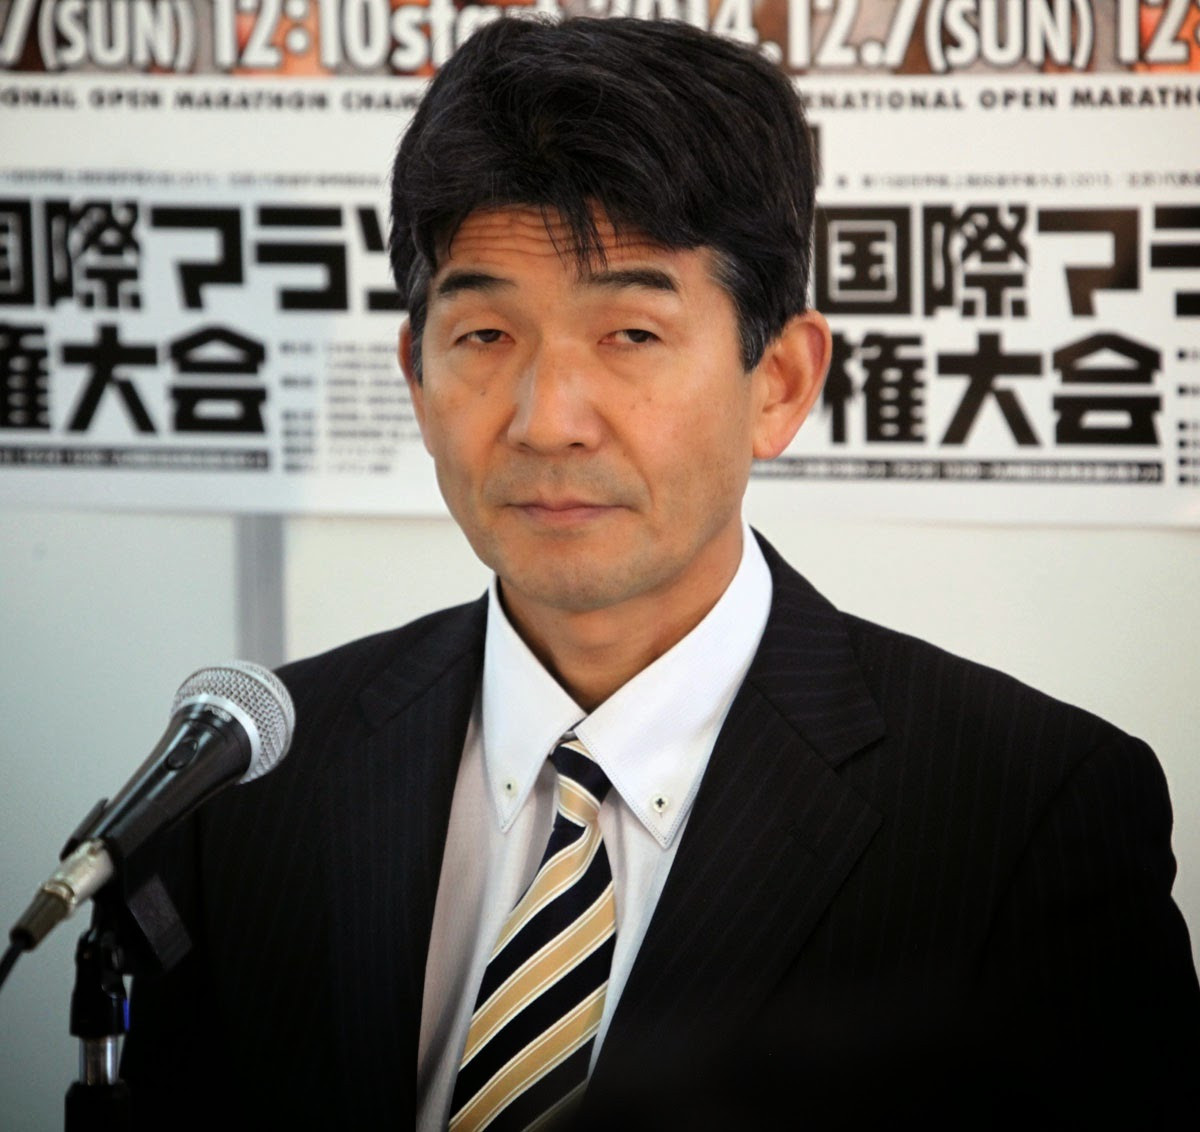 Japan Association of Athletics Federations President Mitsugi Ogata has been appointed head of the Local Organising Committee for the 2025 World Athletics Championships in Tokyo ©JAAA